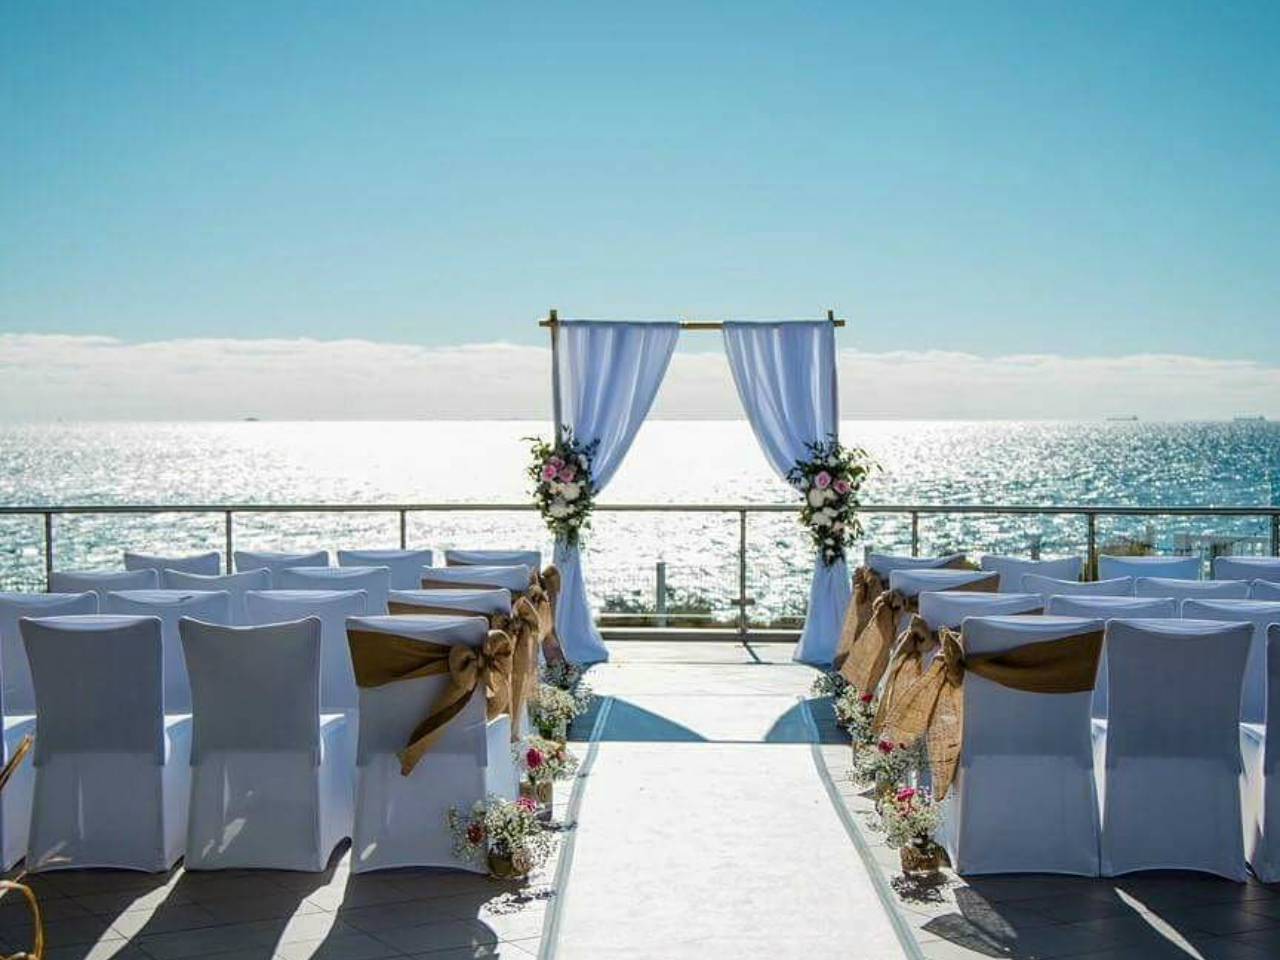 A Alter Leading Up to the Sea With White Chairs For The Guests.